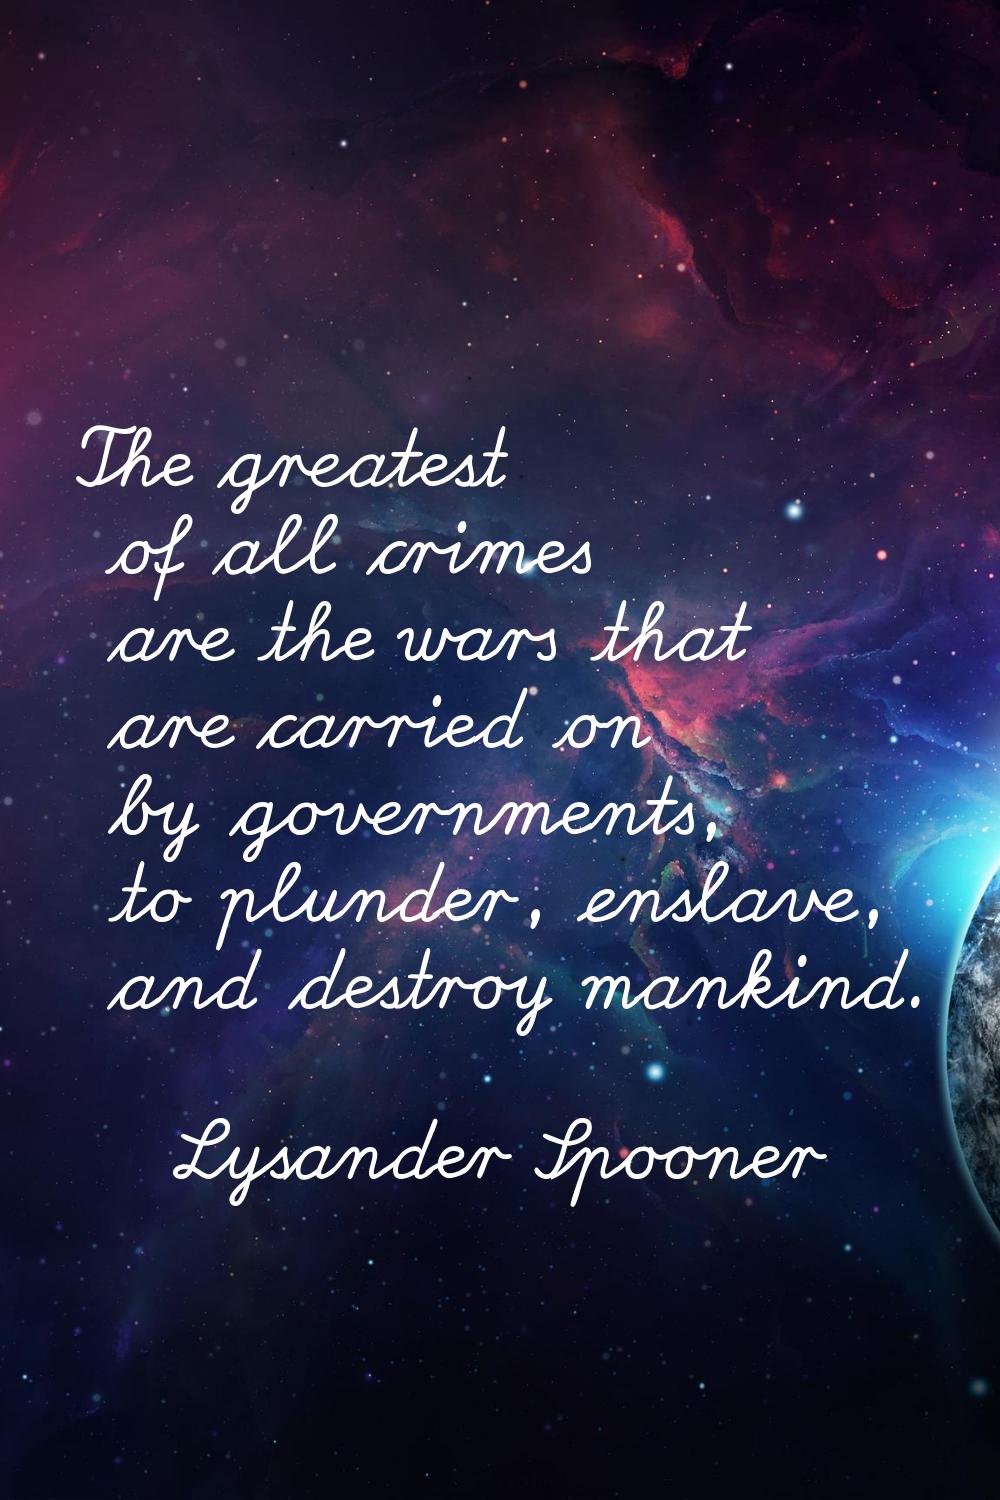 The greatest of all crimes are the wars that are carried on by governments, to plunder, enslave, an